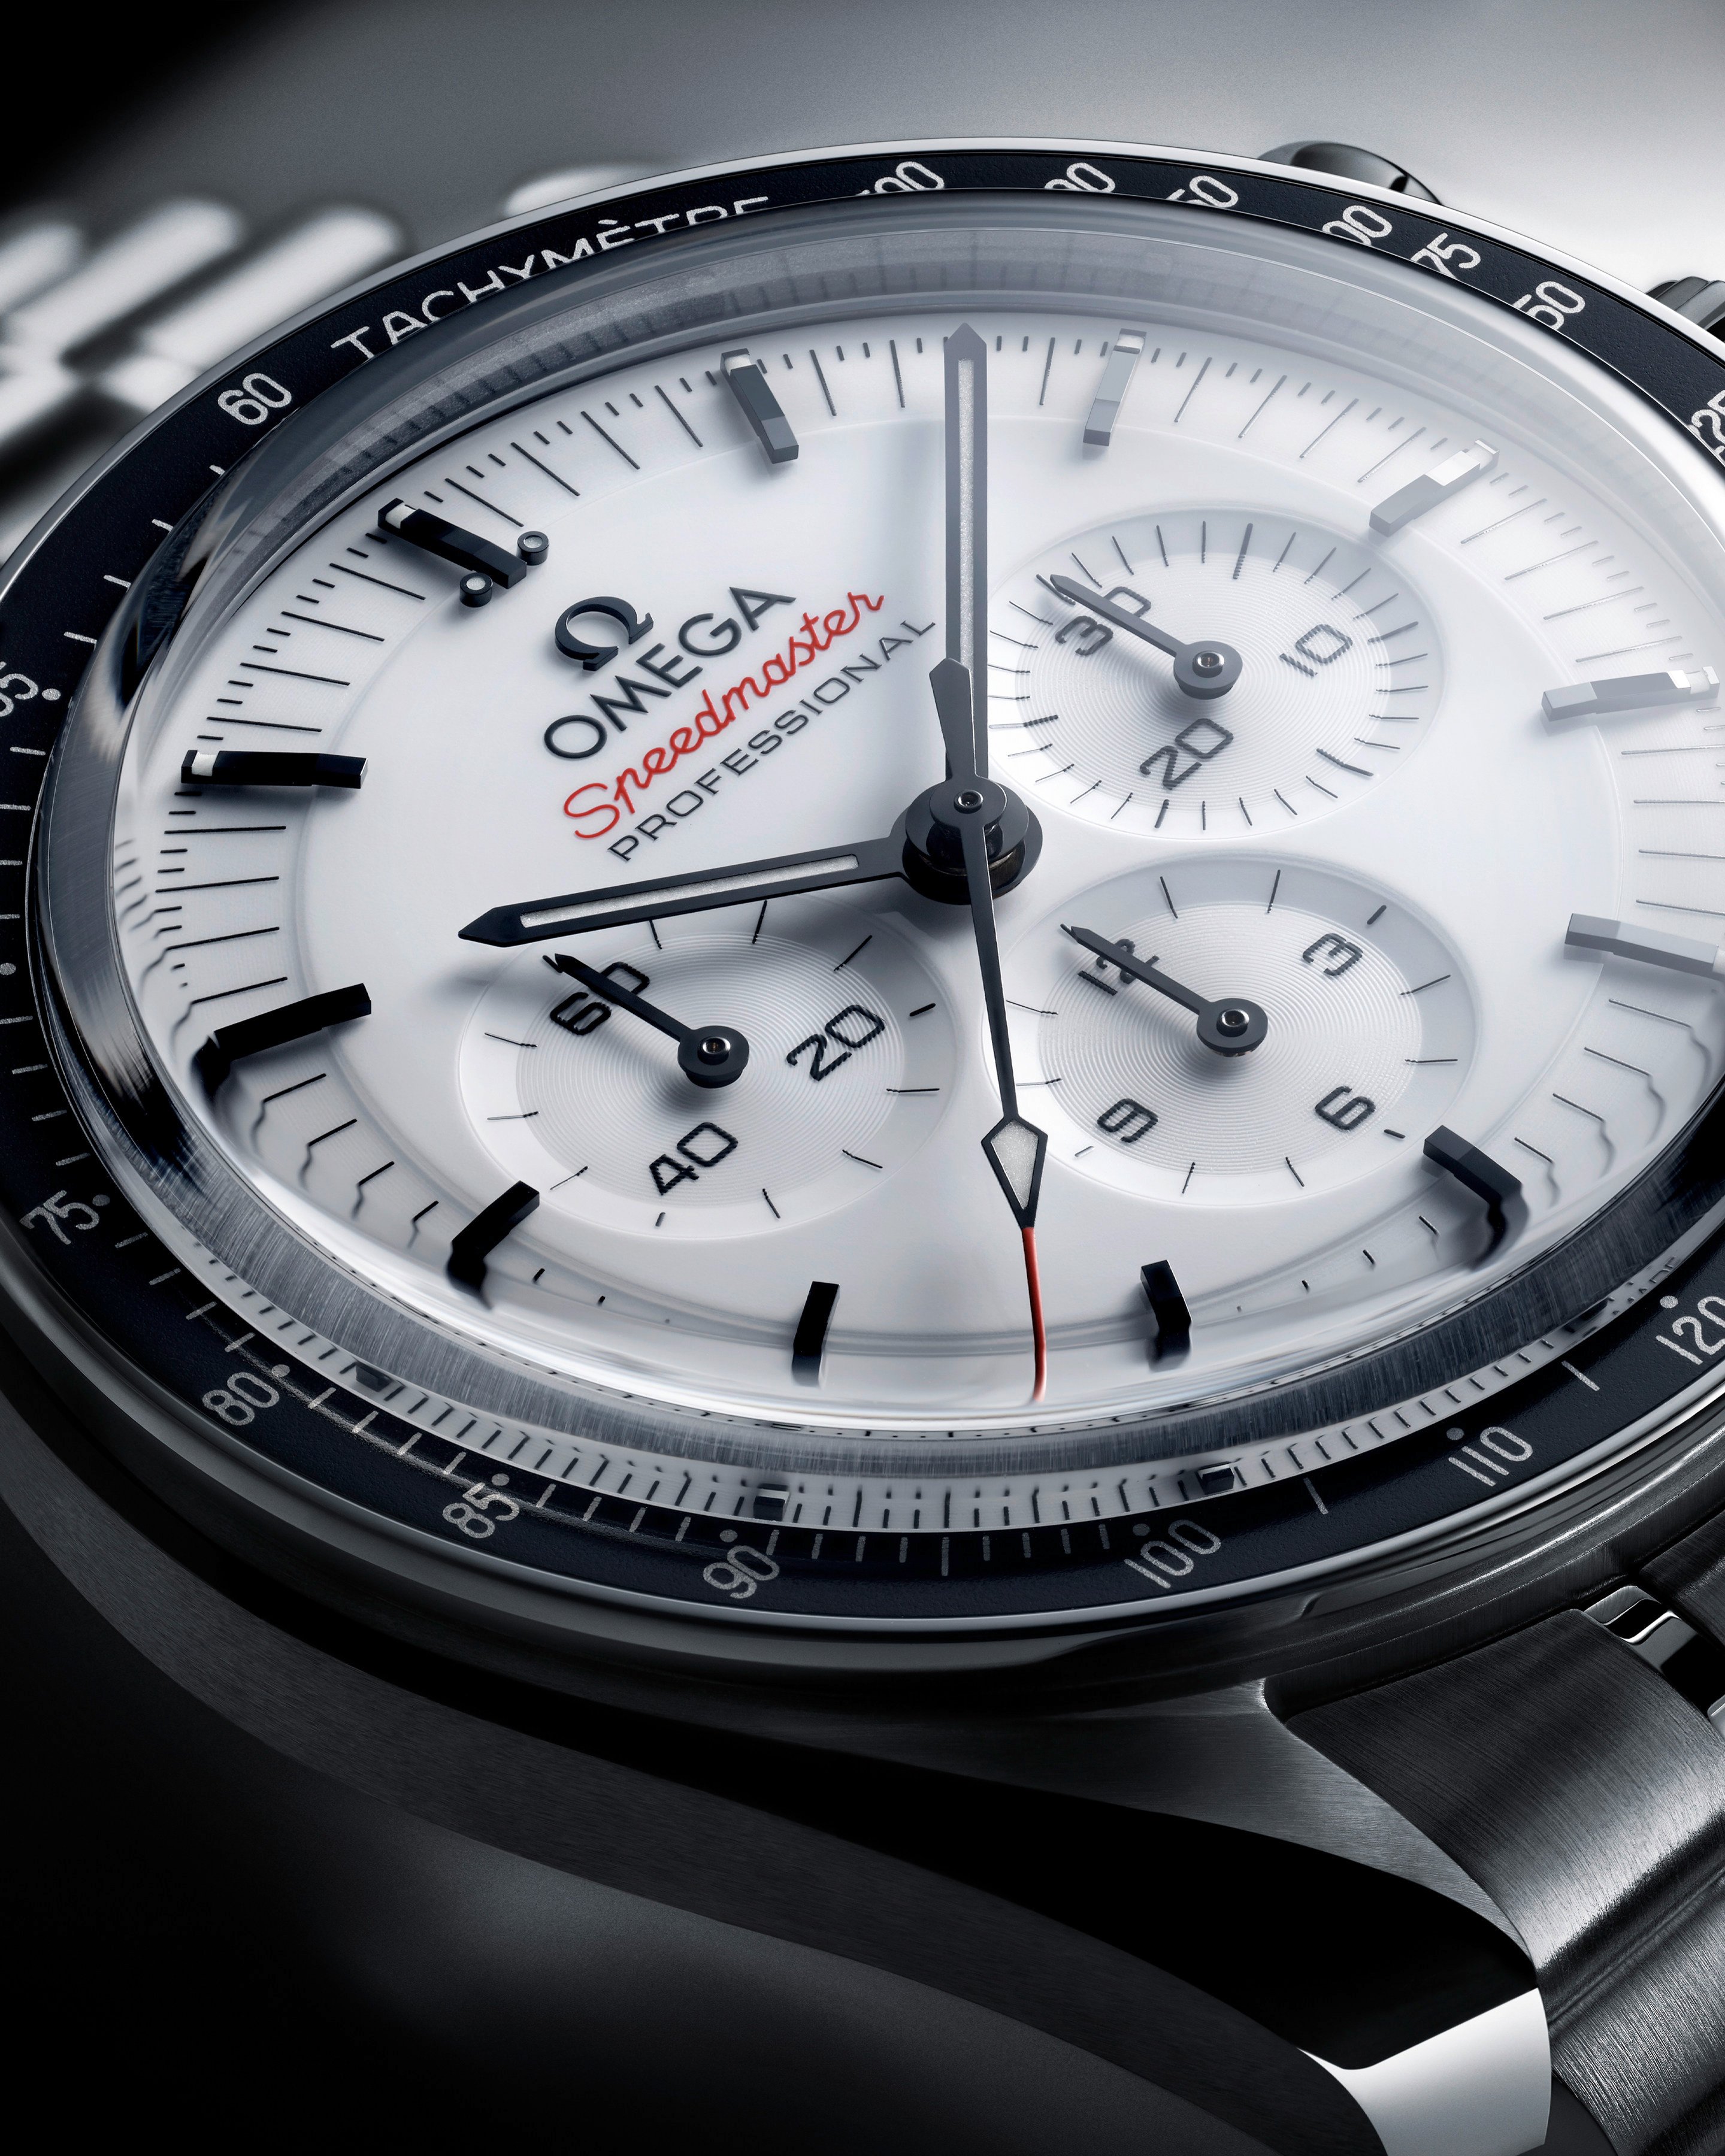 Among Omega’s spring highlights is a new Speedmaster Moonwatch, for the first time with a lacquered white dial. Photos: Handout